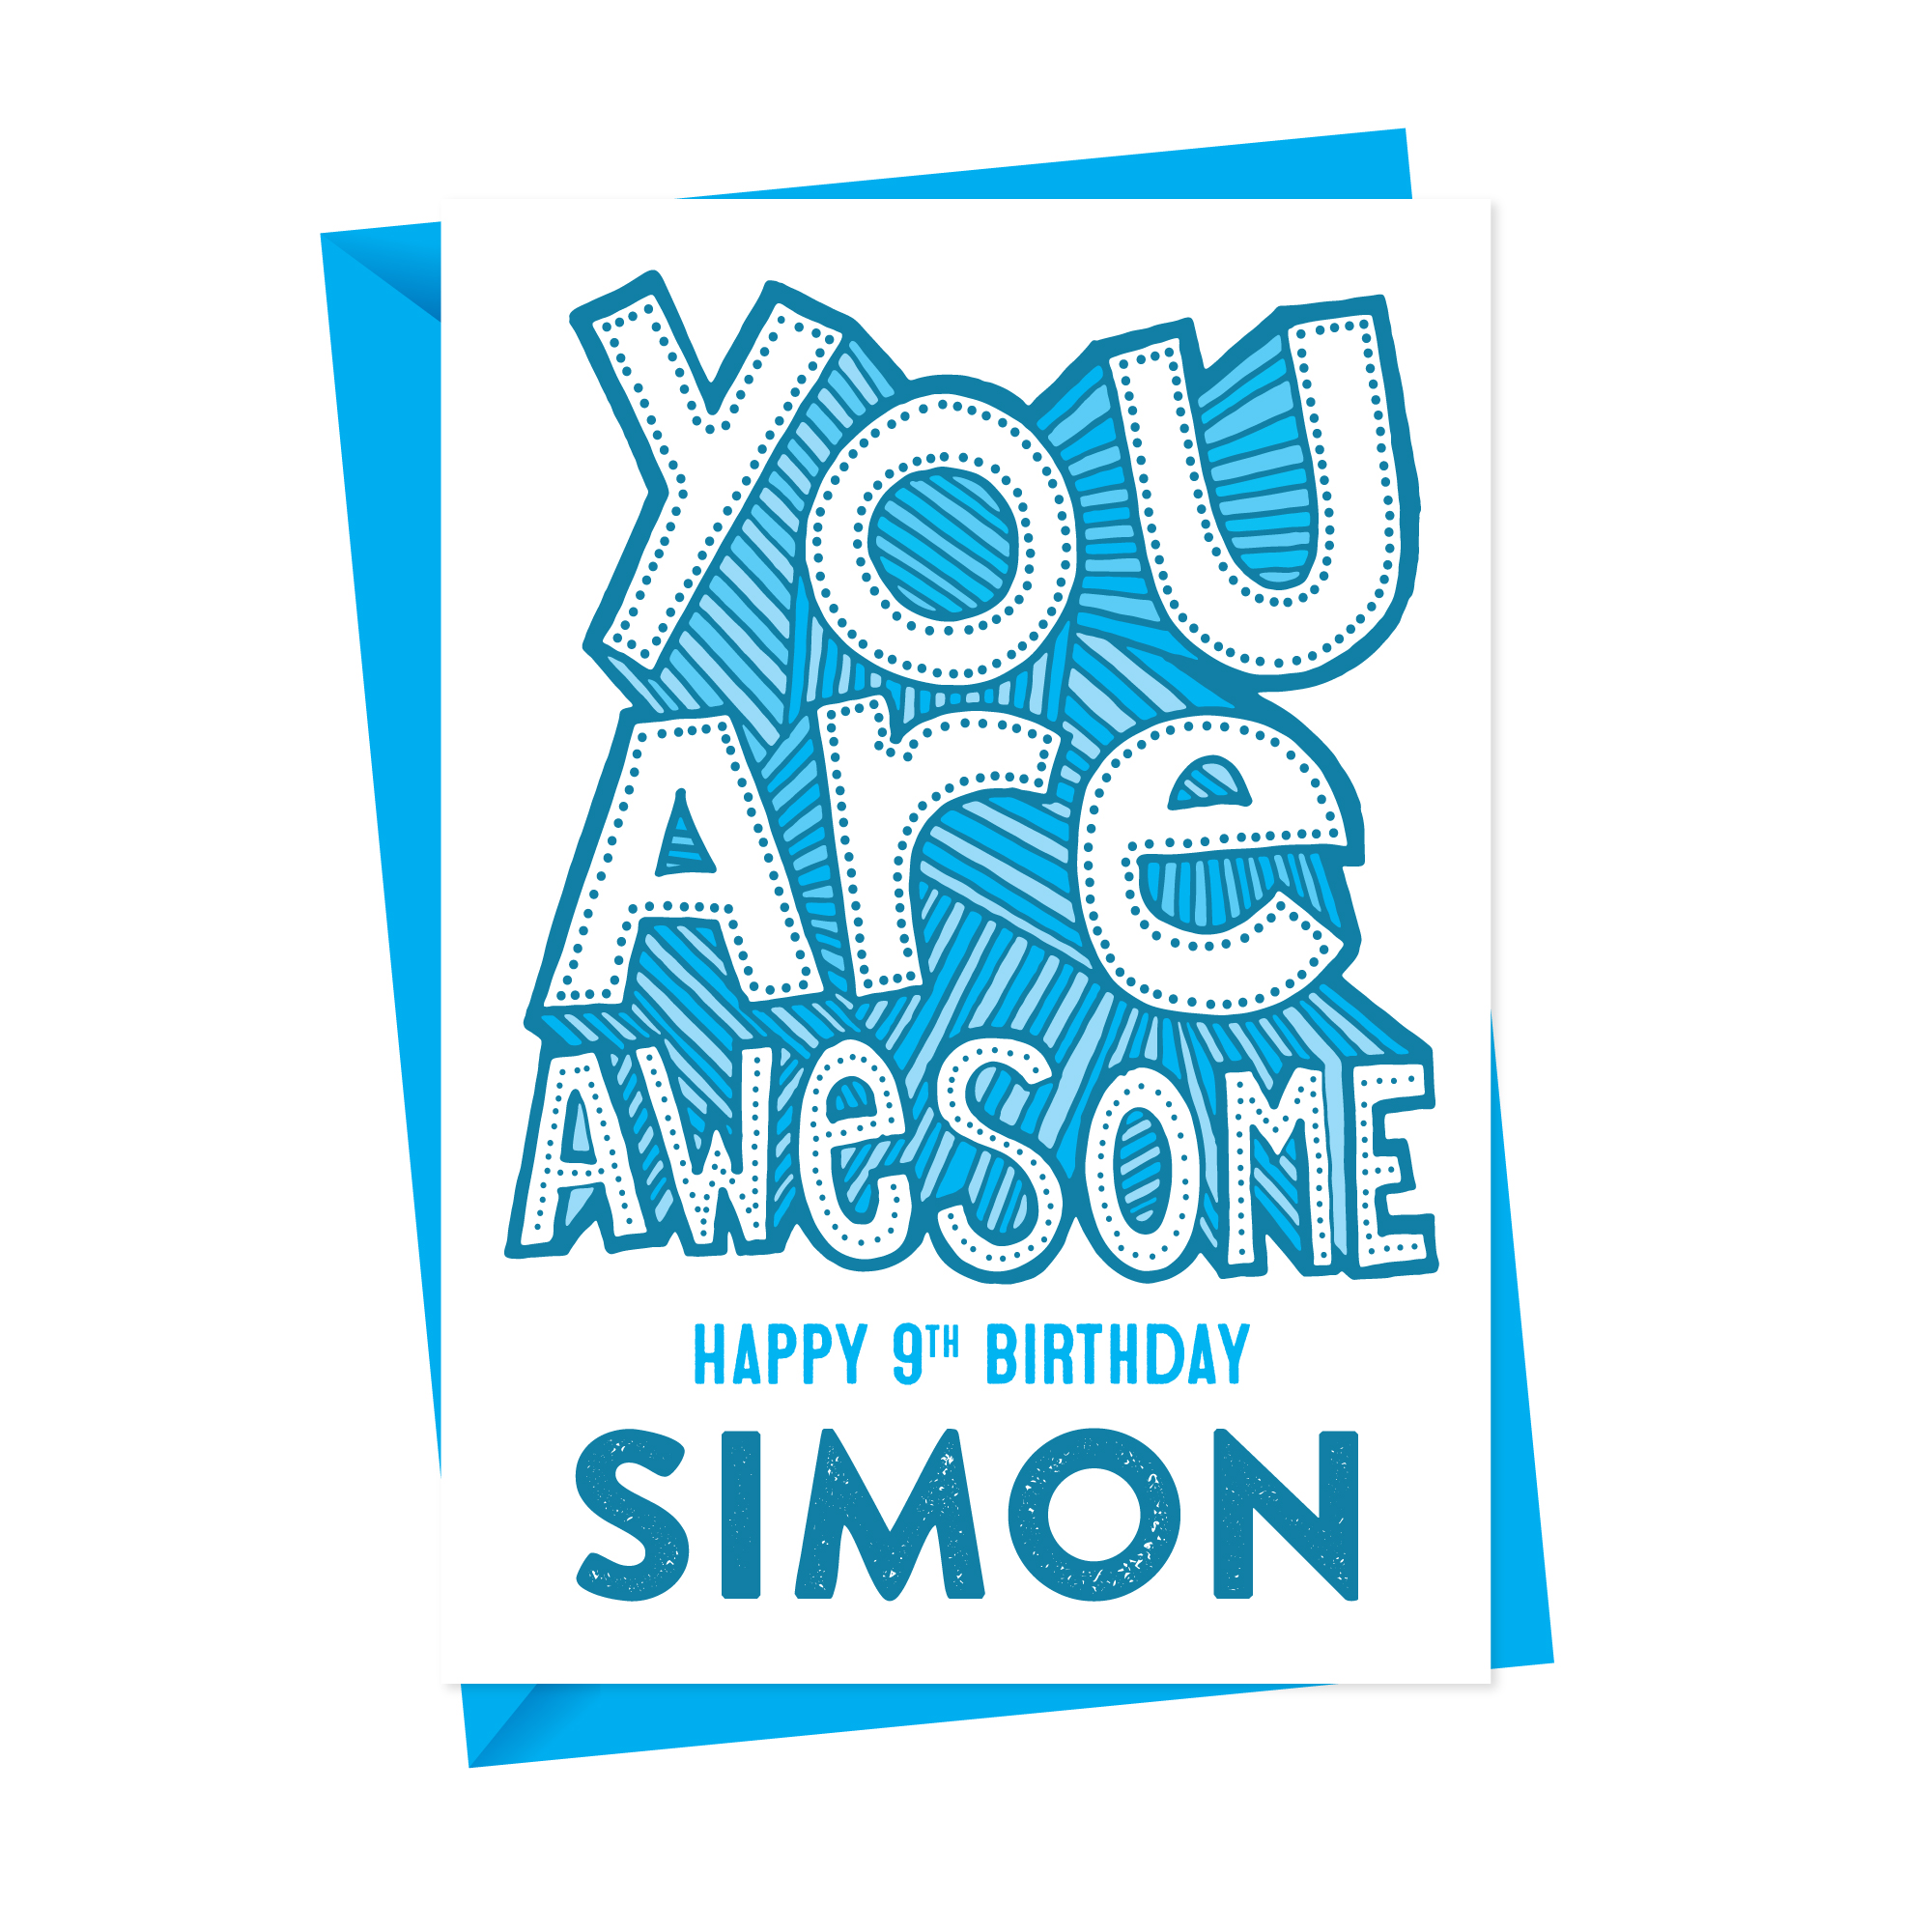 You Are Awesome Personalised Card